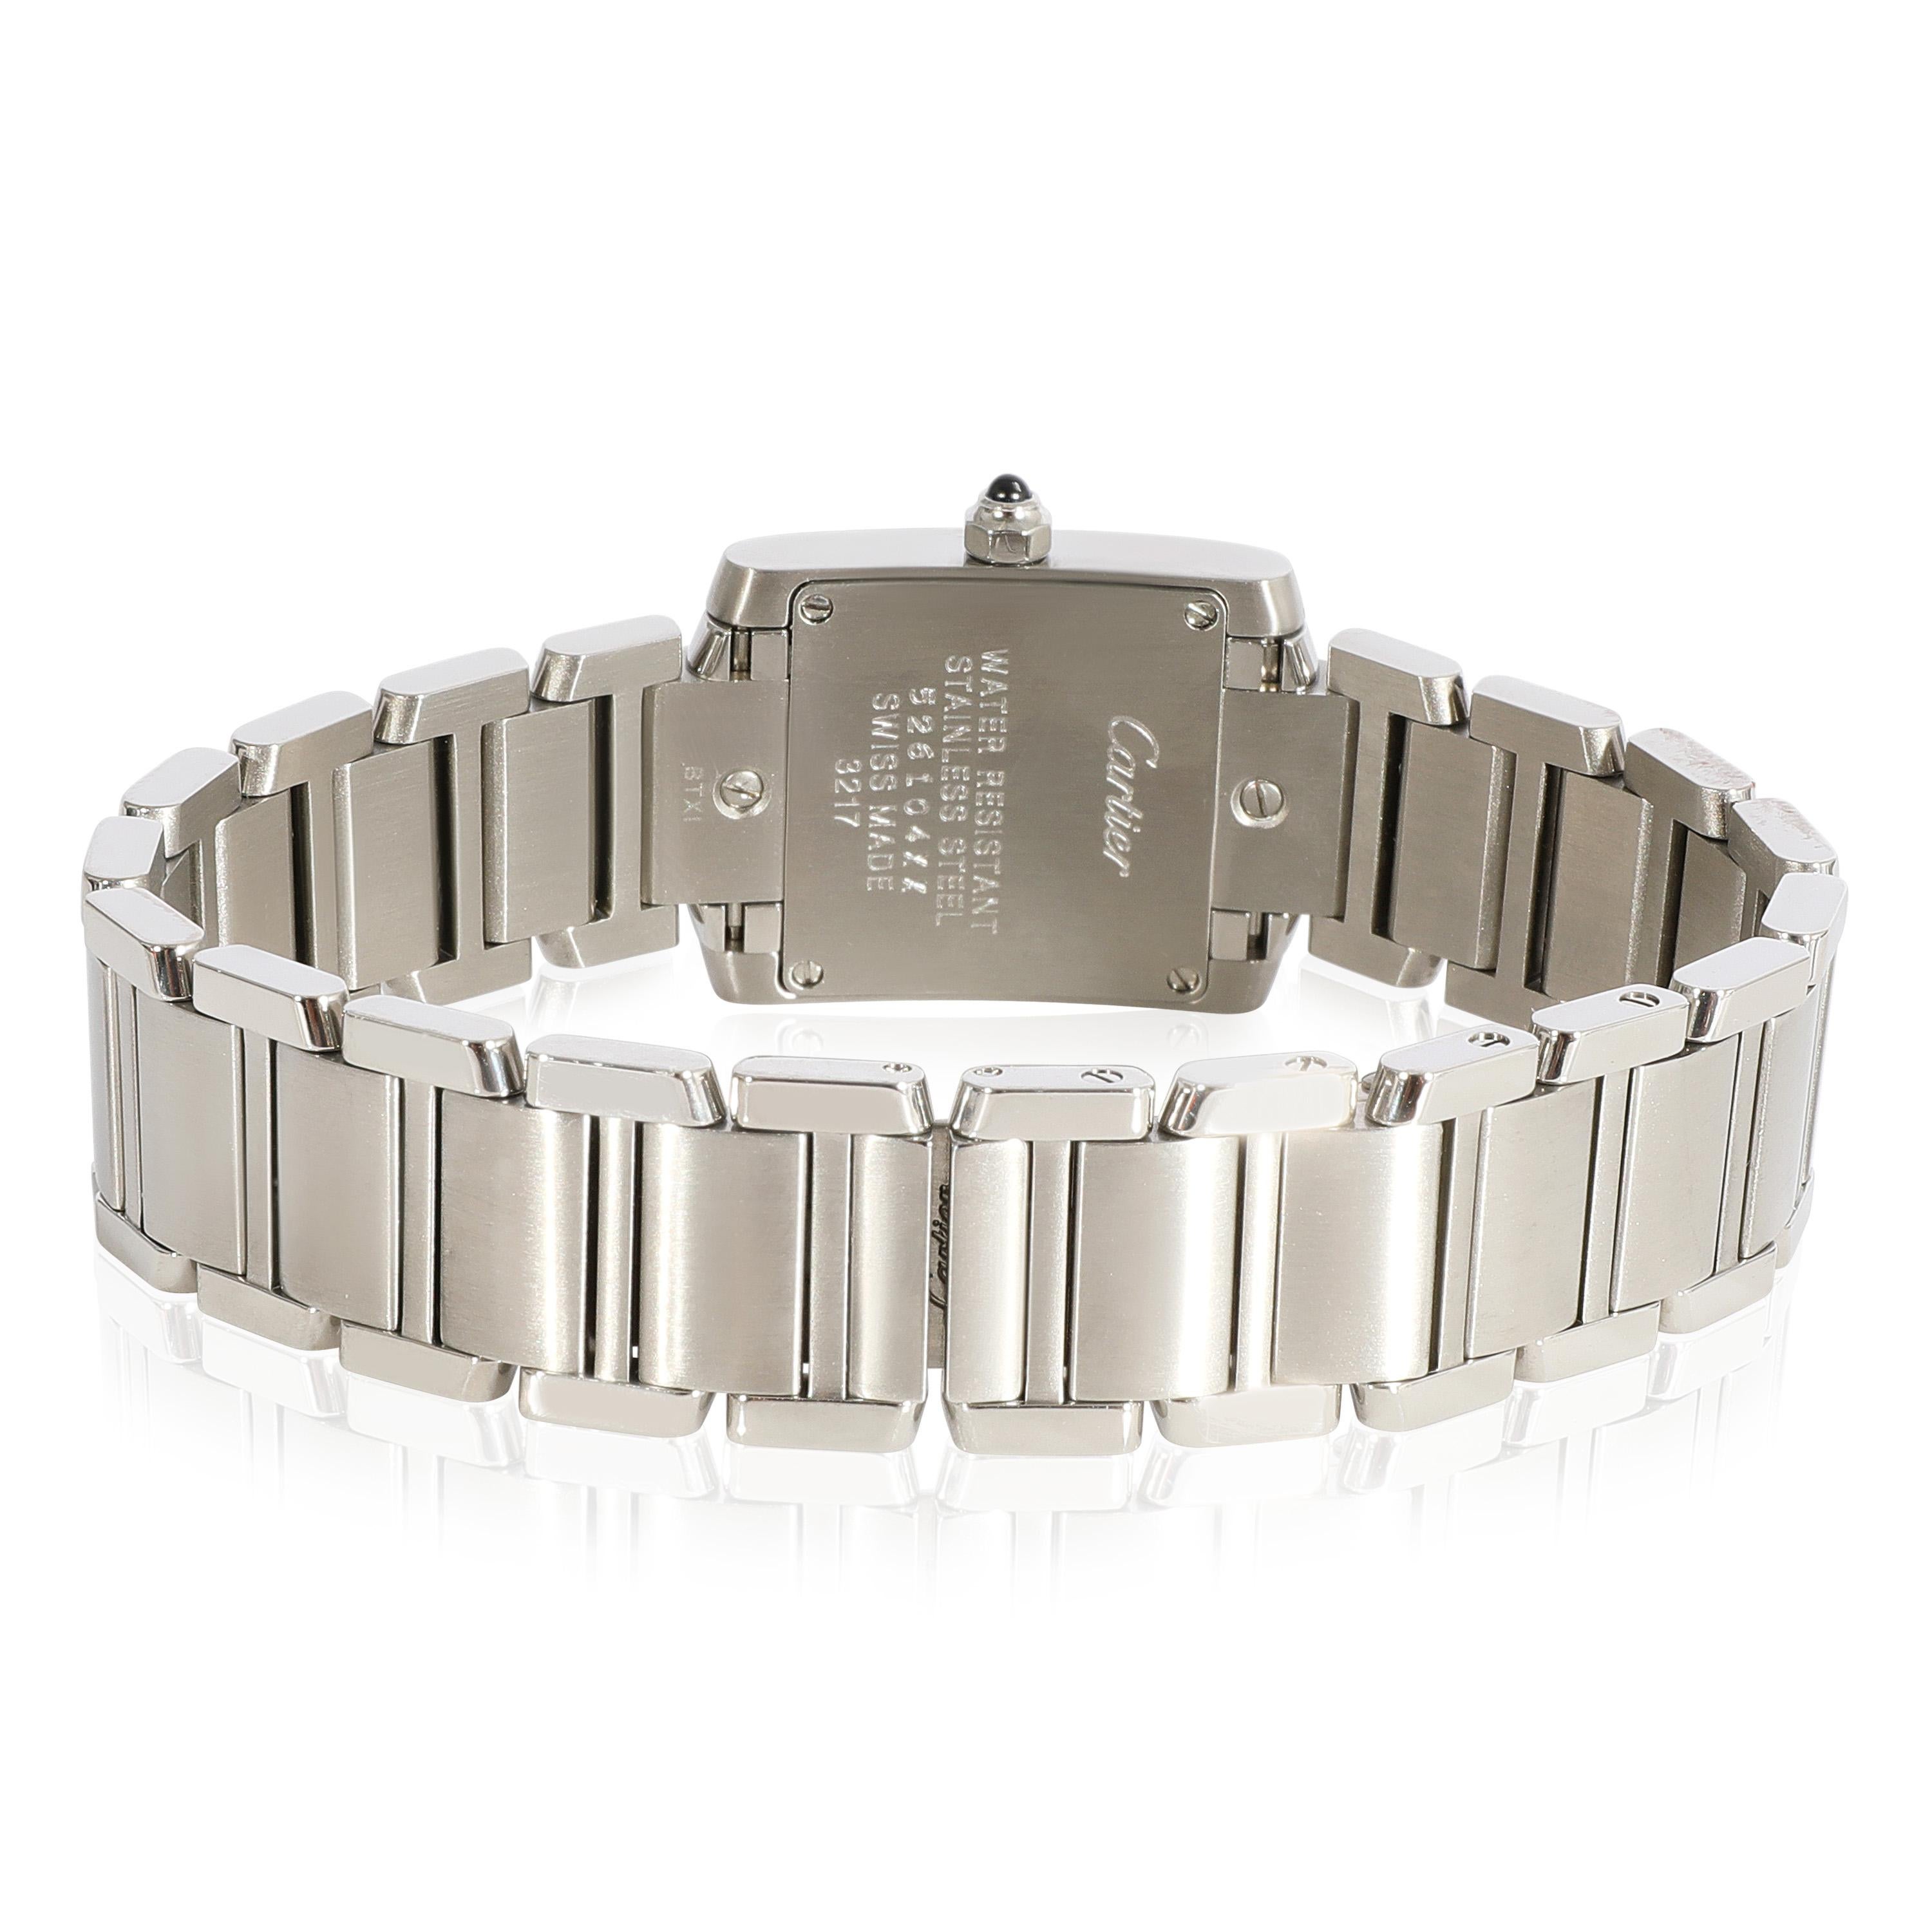 Cartier Tank Francaise WE110006 Women's Watch in  Stainless Steel

SKU: 121809

PRIMARY DETAILS
Brand: Cartier
Model: Tank Francaise
Country of Origin: Switzerland
Movement Type: Quartz: Battery
Year of Manufacture: 2010-2019
Condition: Retail price